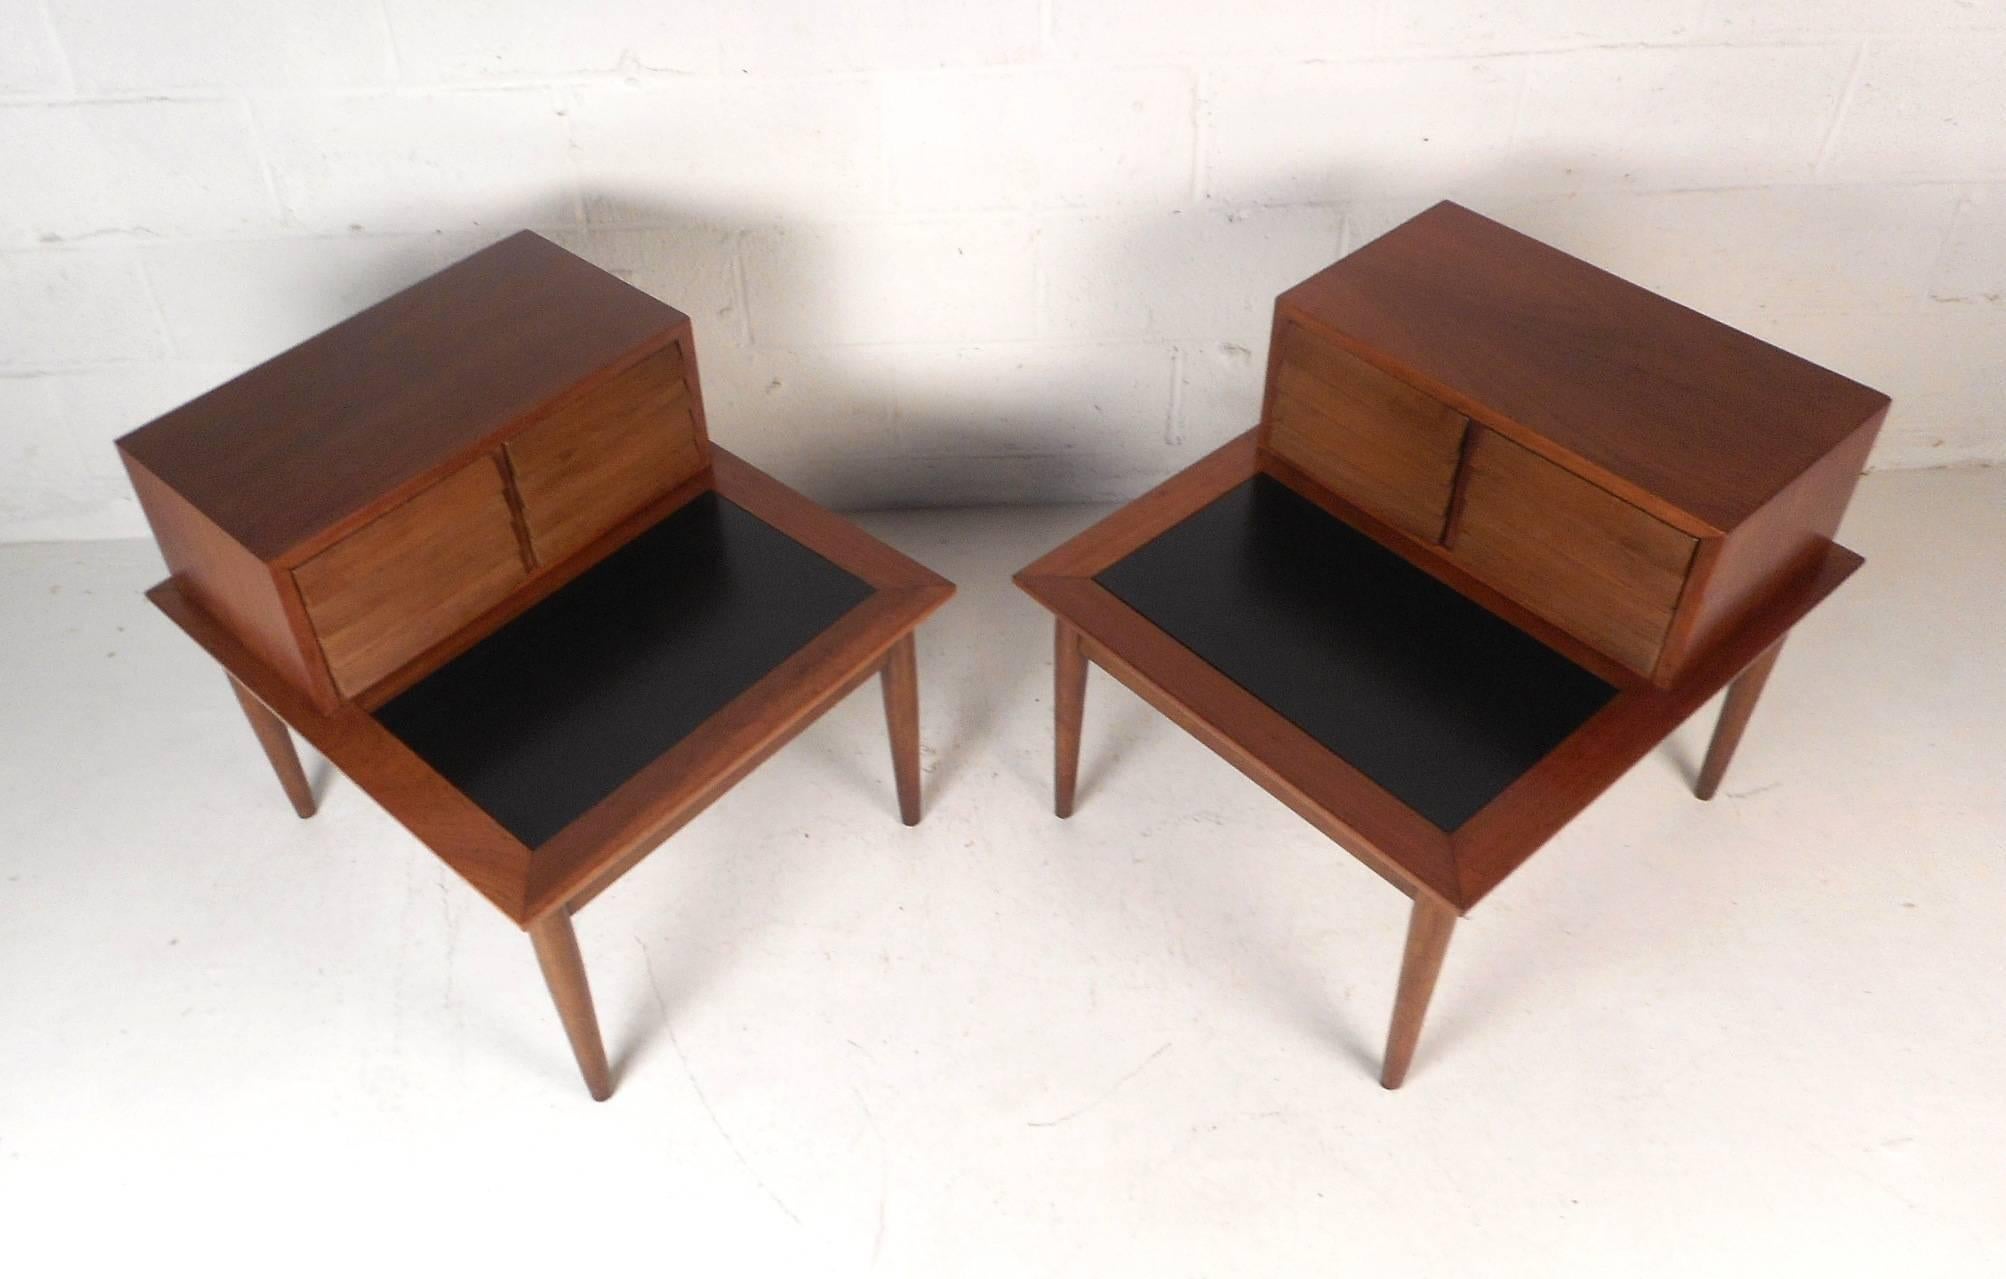 This stunning pair of vintage modern end tables feature two small louvered drawers and a bottom tier with a black laminate top. A sleek two-tier design made of walnut that sits on top of four tapered legs. Quality construction with four sculpted